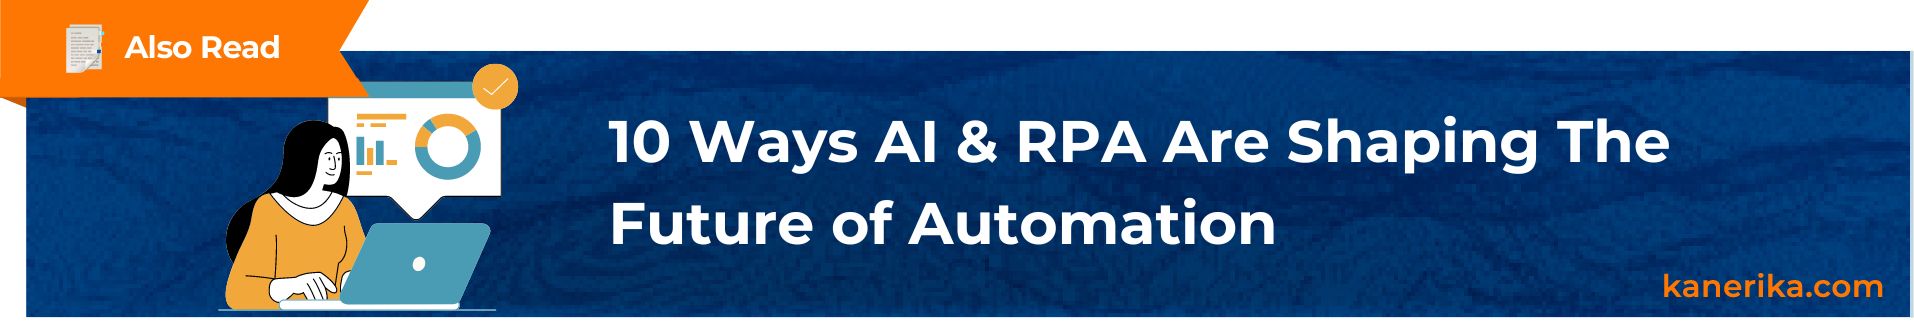 Case Study - 10 Ways AI & RPA Are Shaping The Future of Automation